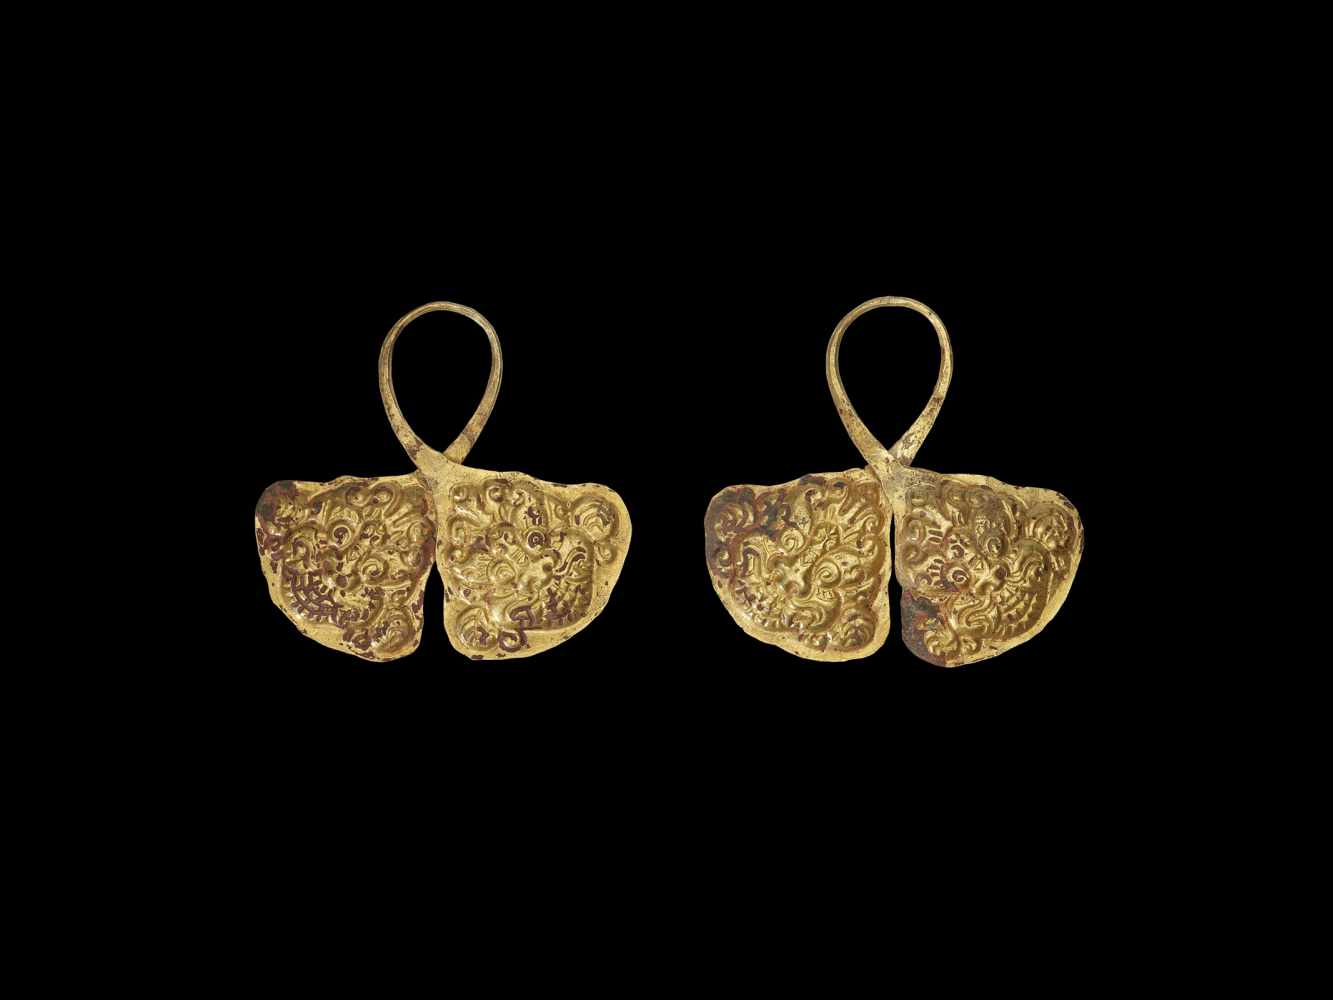 A PAIR OF CHAM REPOUSSÉ GOLD CROWN ORNAMENTS WITH GUARDIAN LIONS Champa, c. 8th – 9th century. The